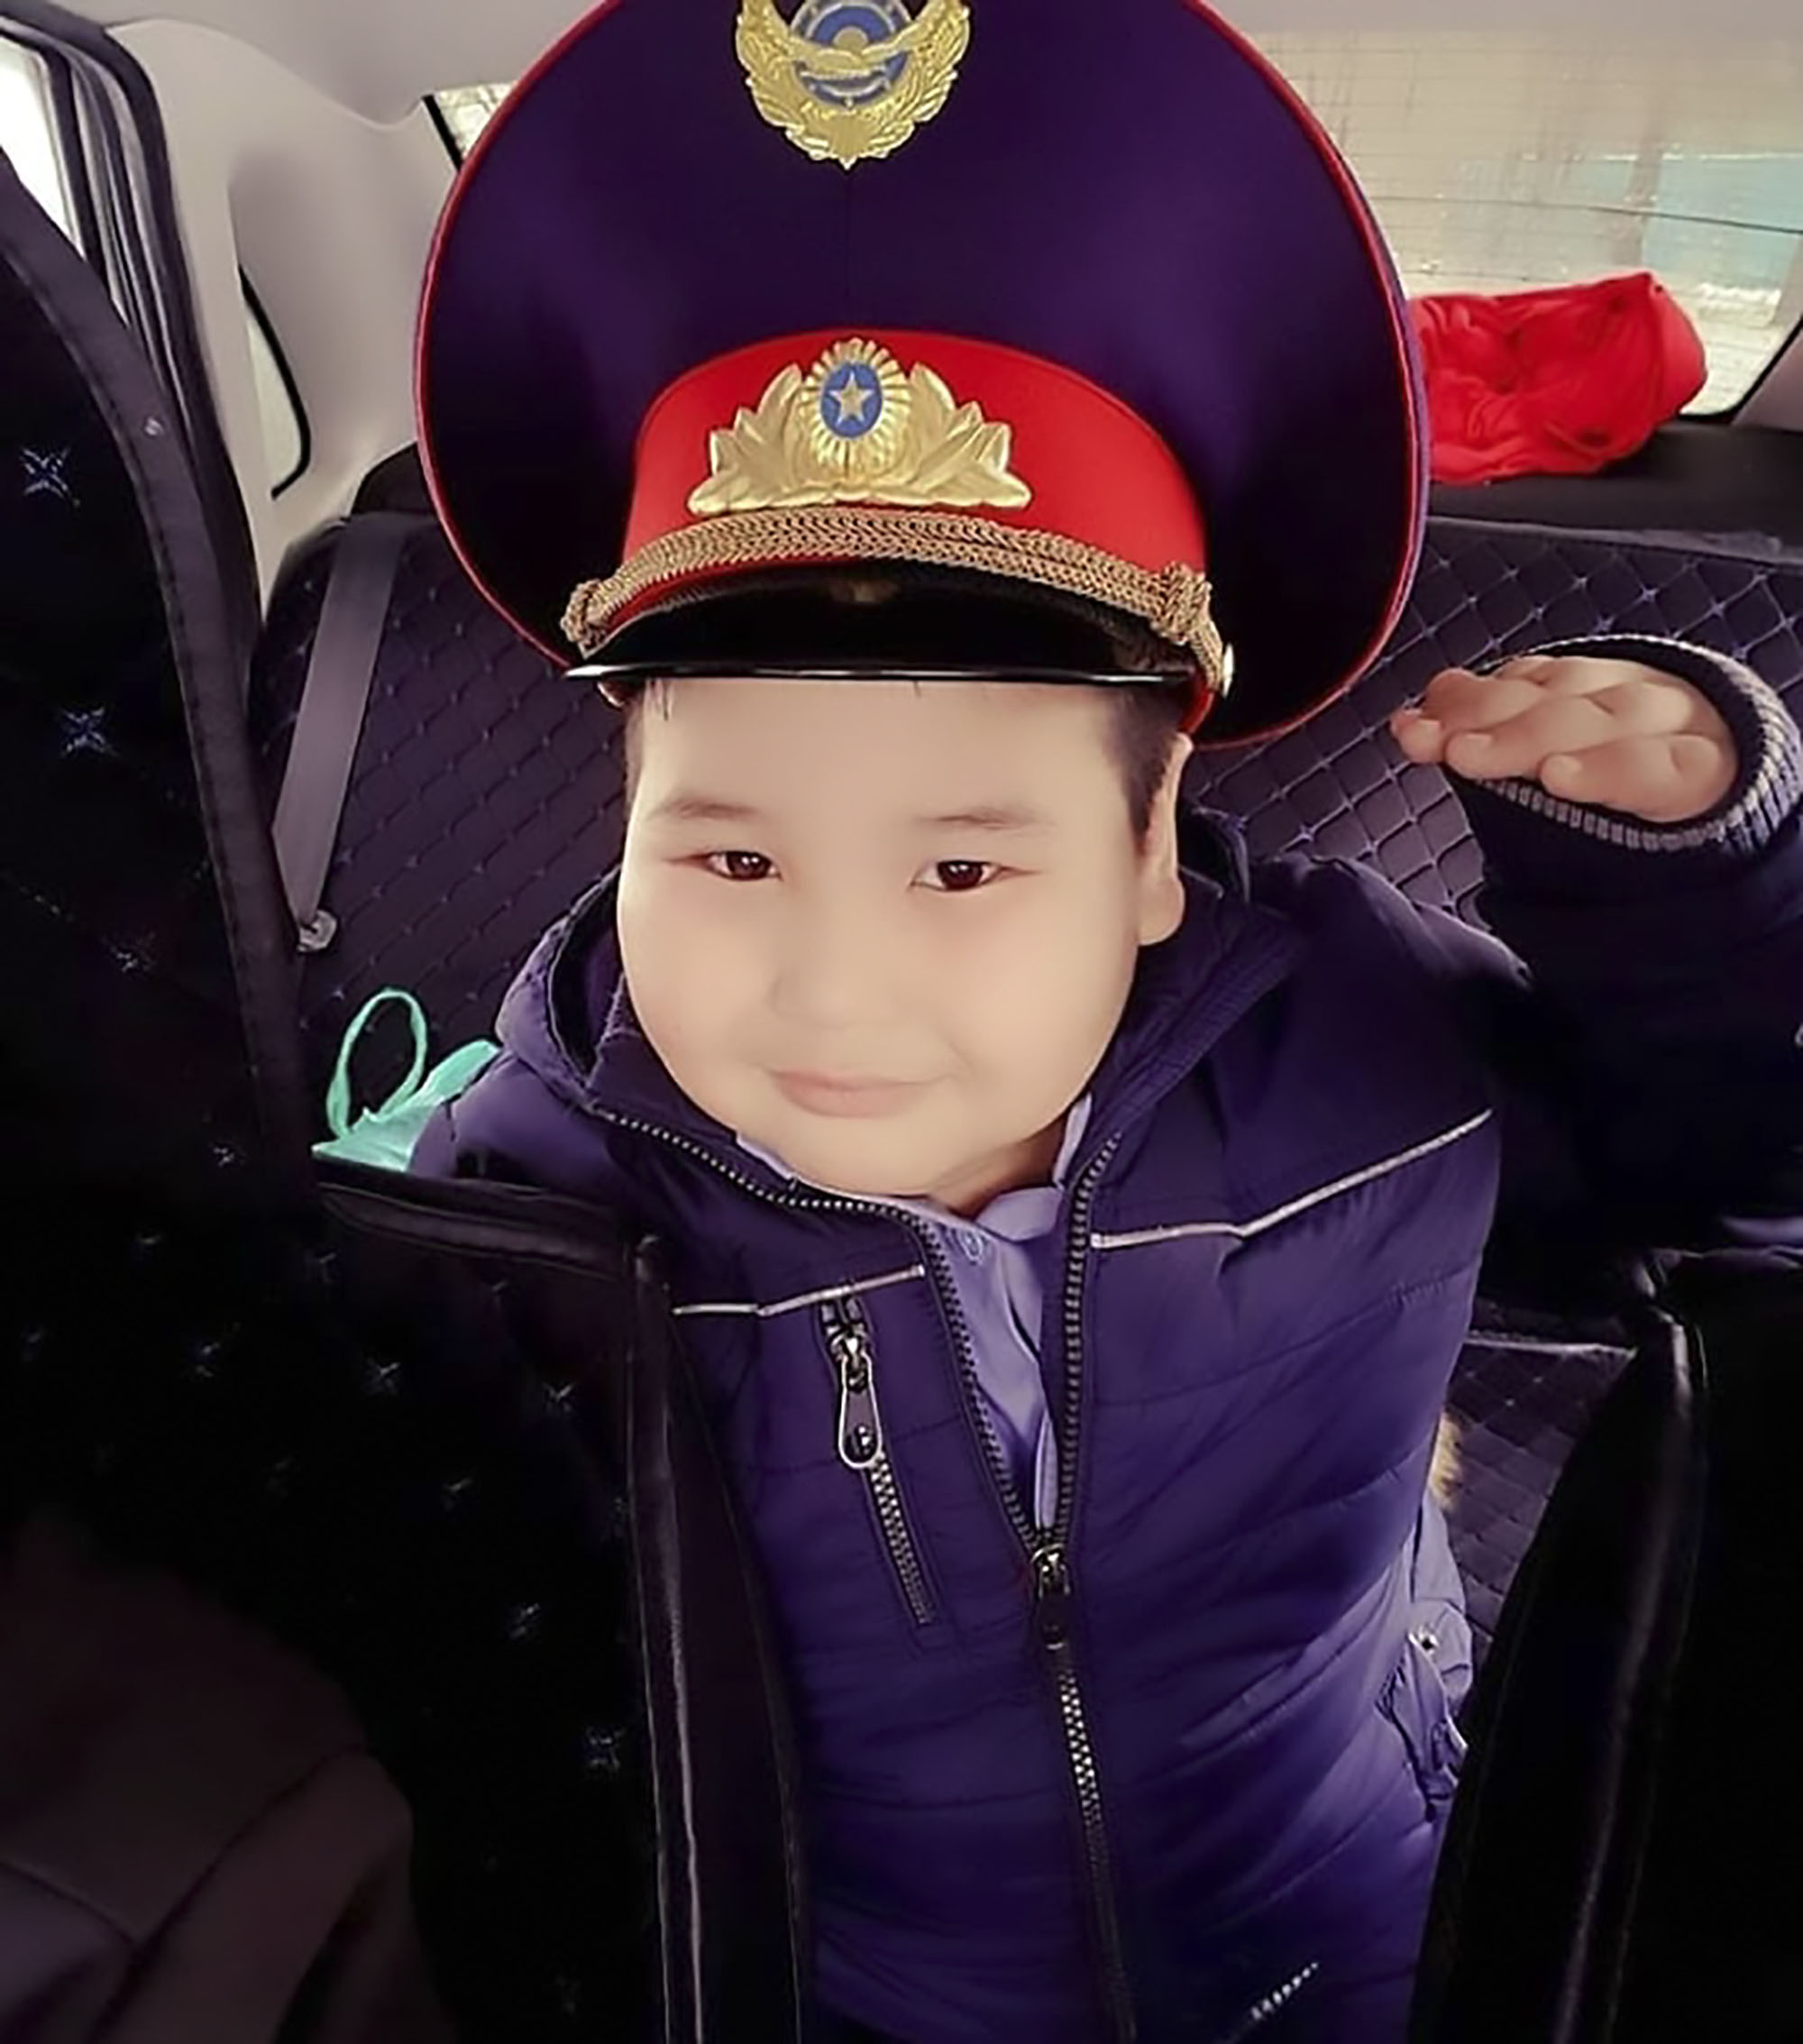 Read more about the article Cute Boy Dressed As Cop Melts Netizens And Police Hearts